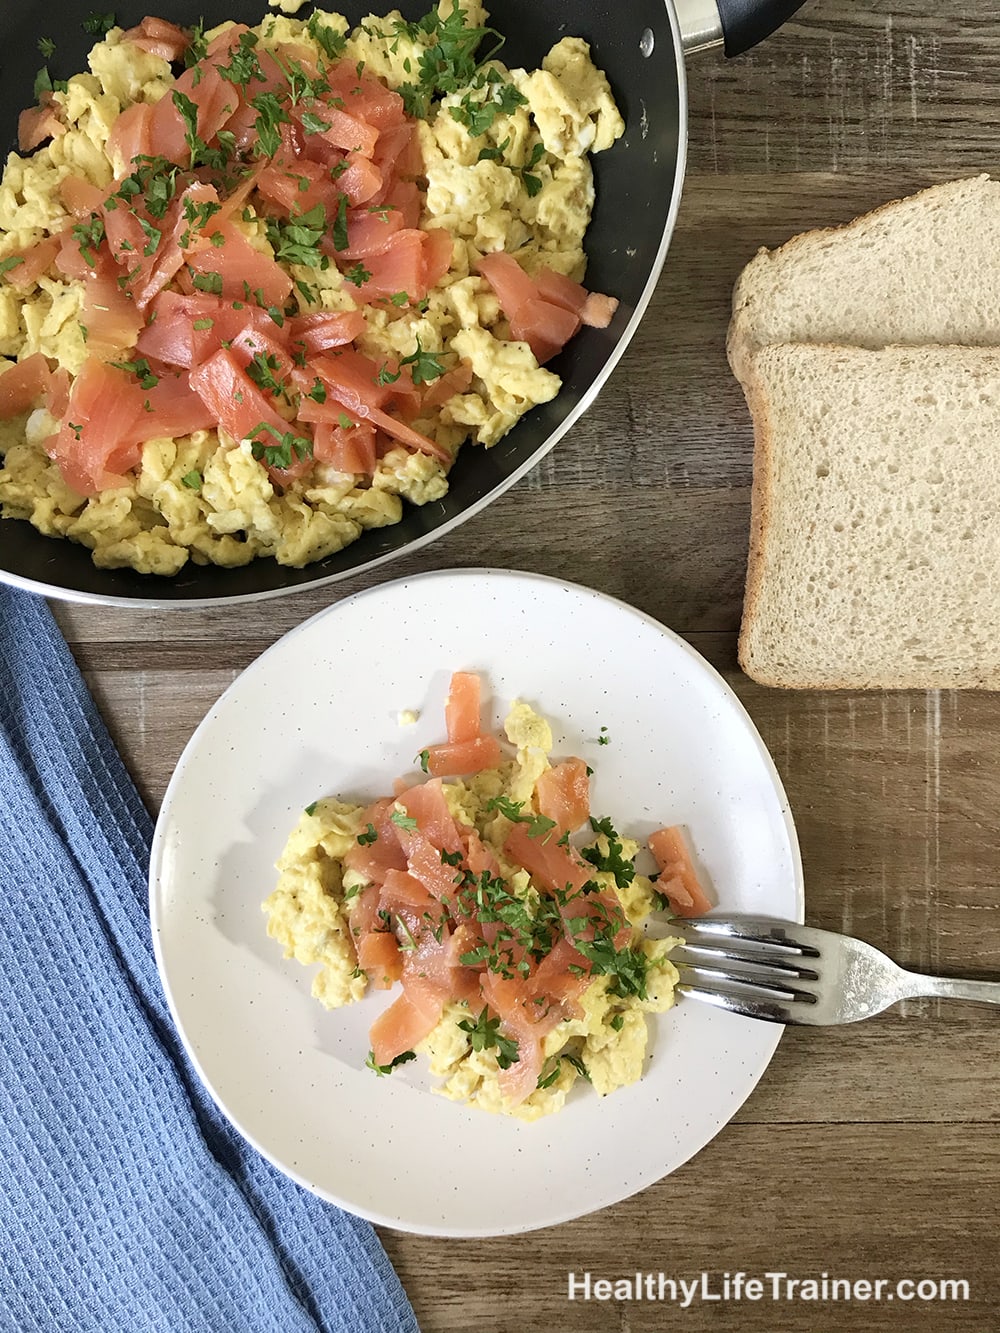 Smoked Salmon With Scrambled Eggs For Quick Healthy Breakfast